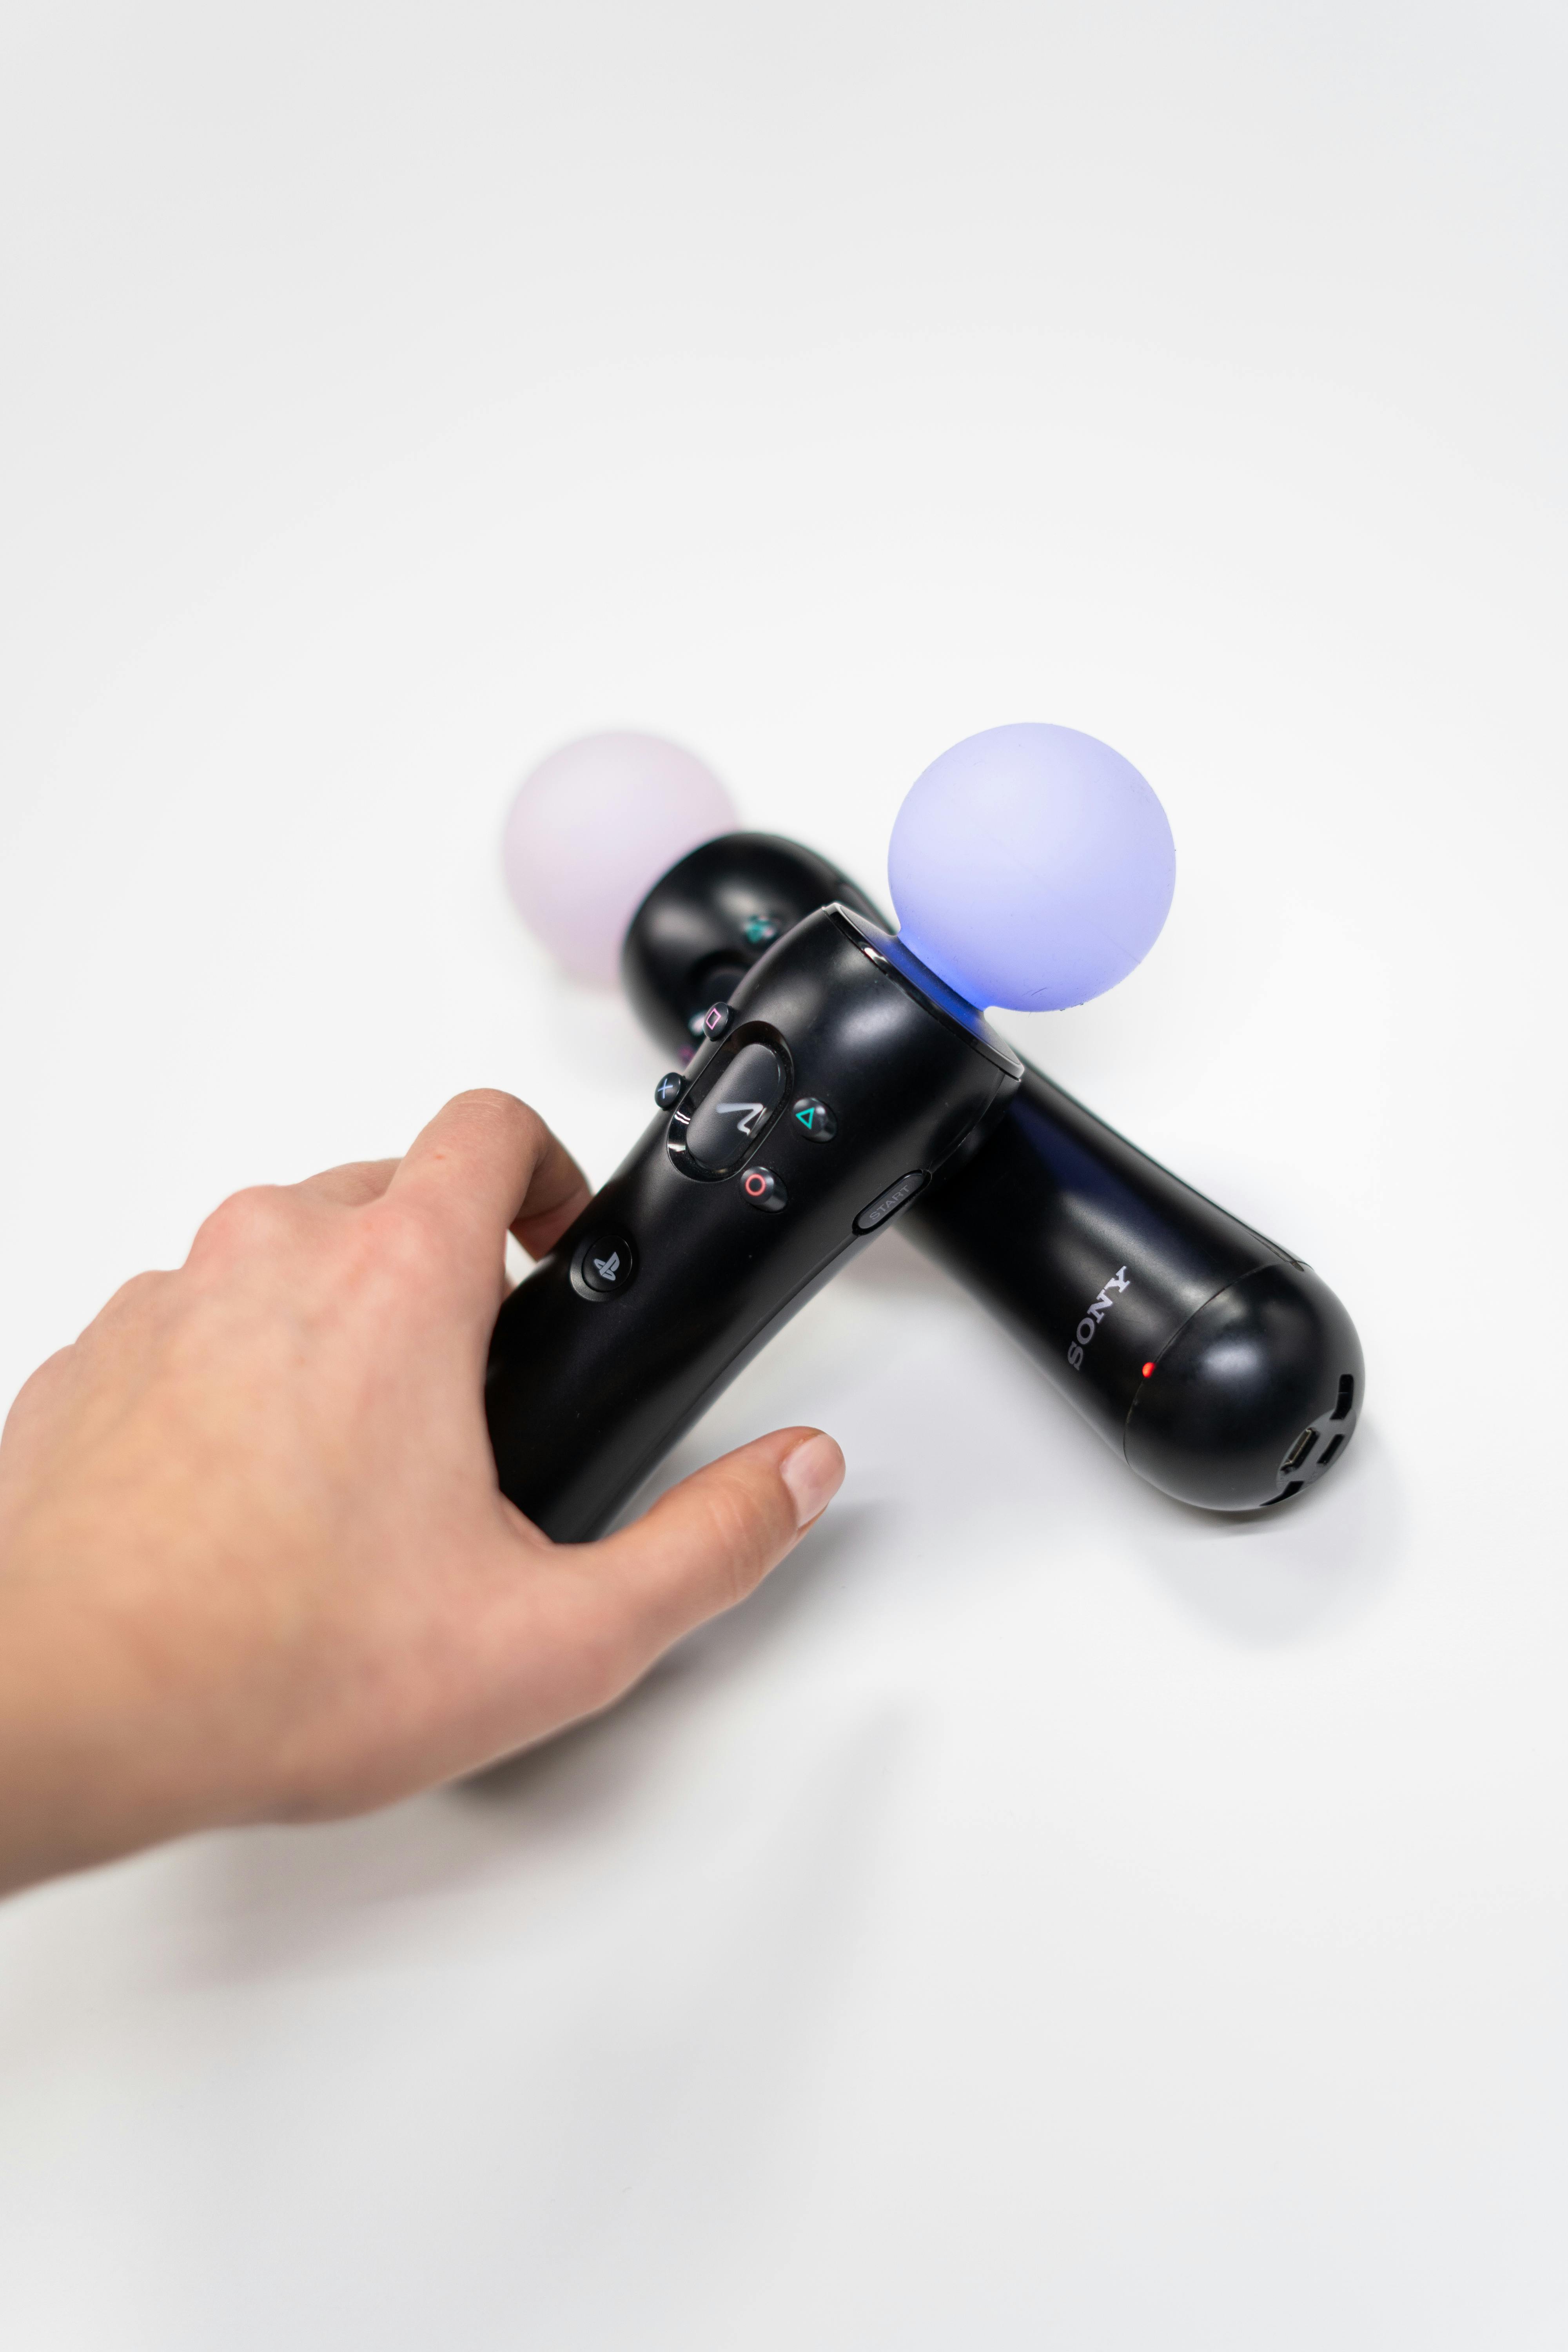 Accessoires PS4 Sony Playstation Move